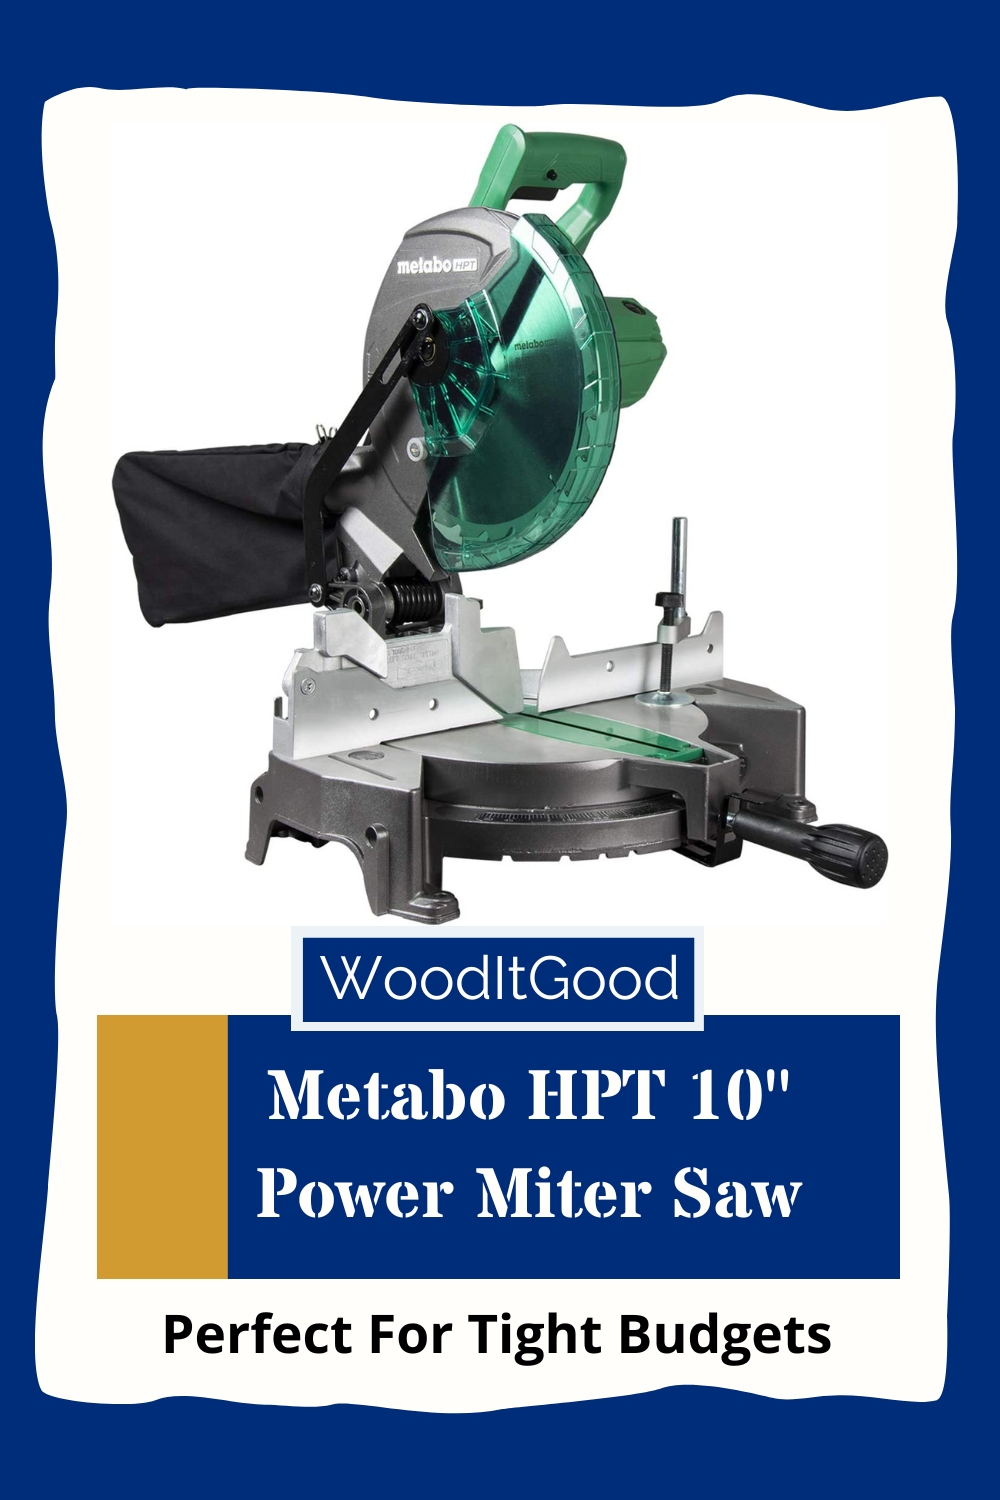 The Metabo HPT 10" Power Miter Saw is the best miter saw if you're working on a budget.